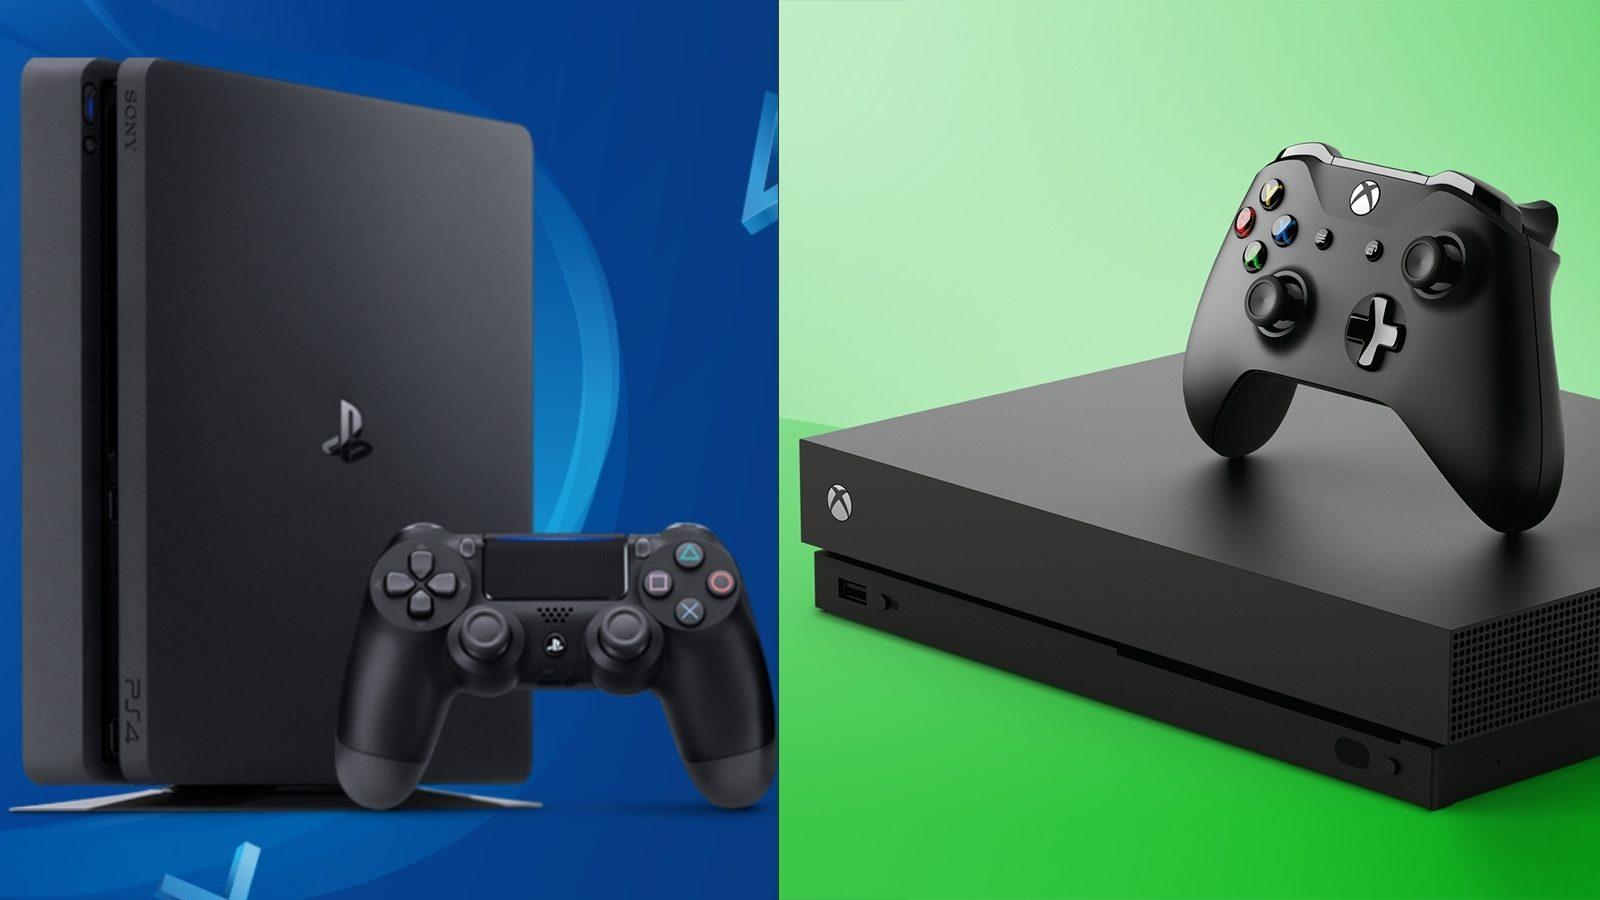 Xbox One X vs PS4 Pro - which should you buy in 2019?